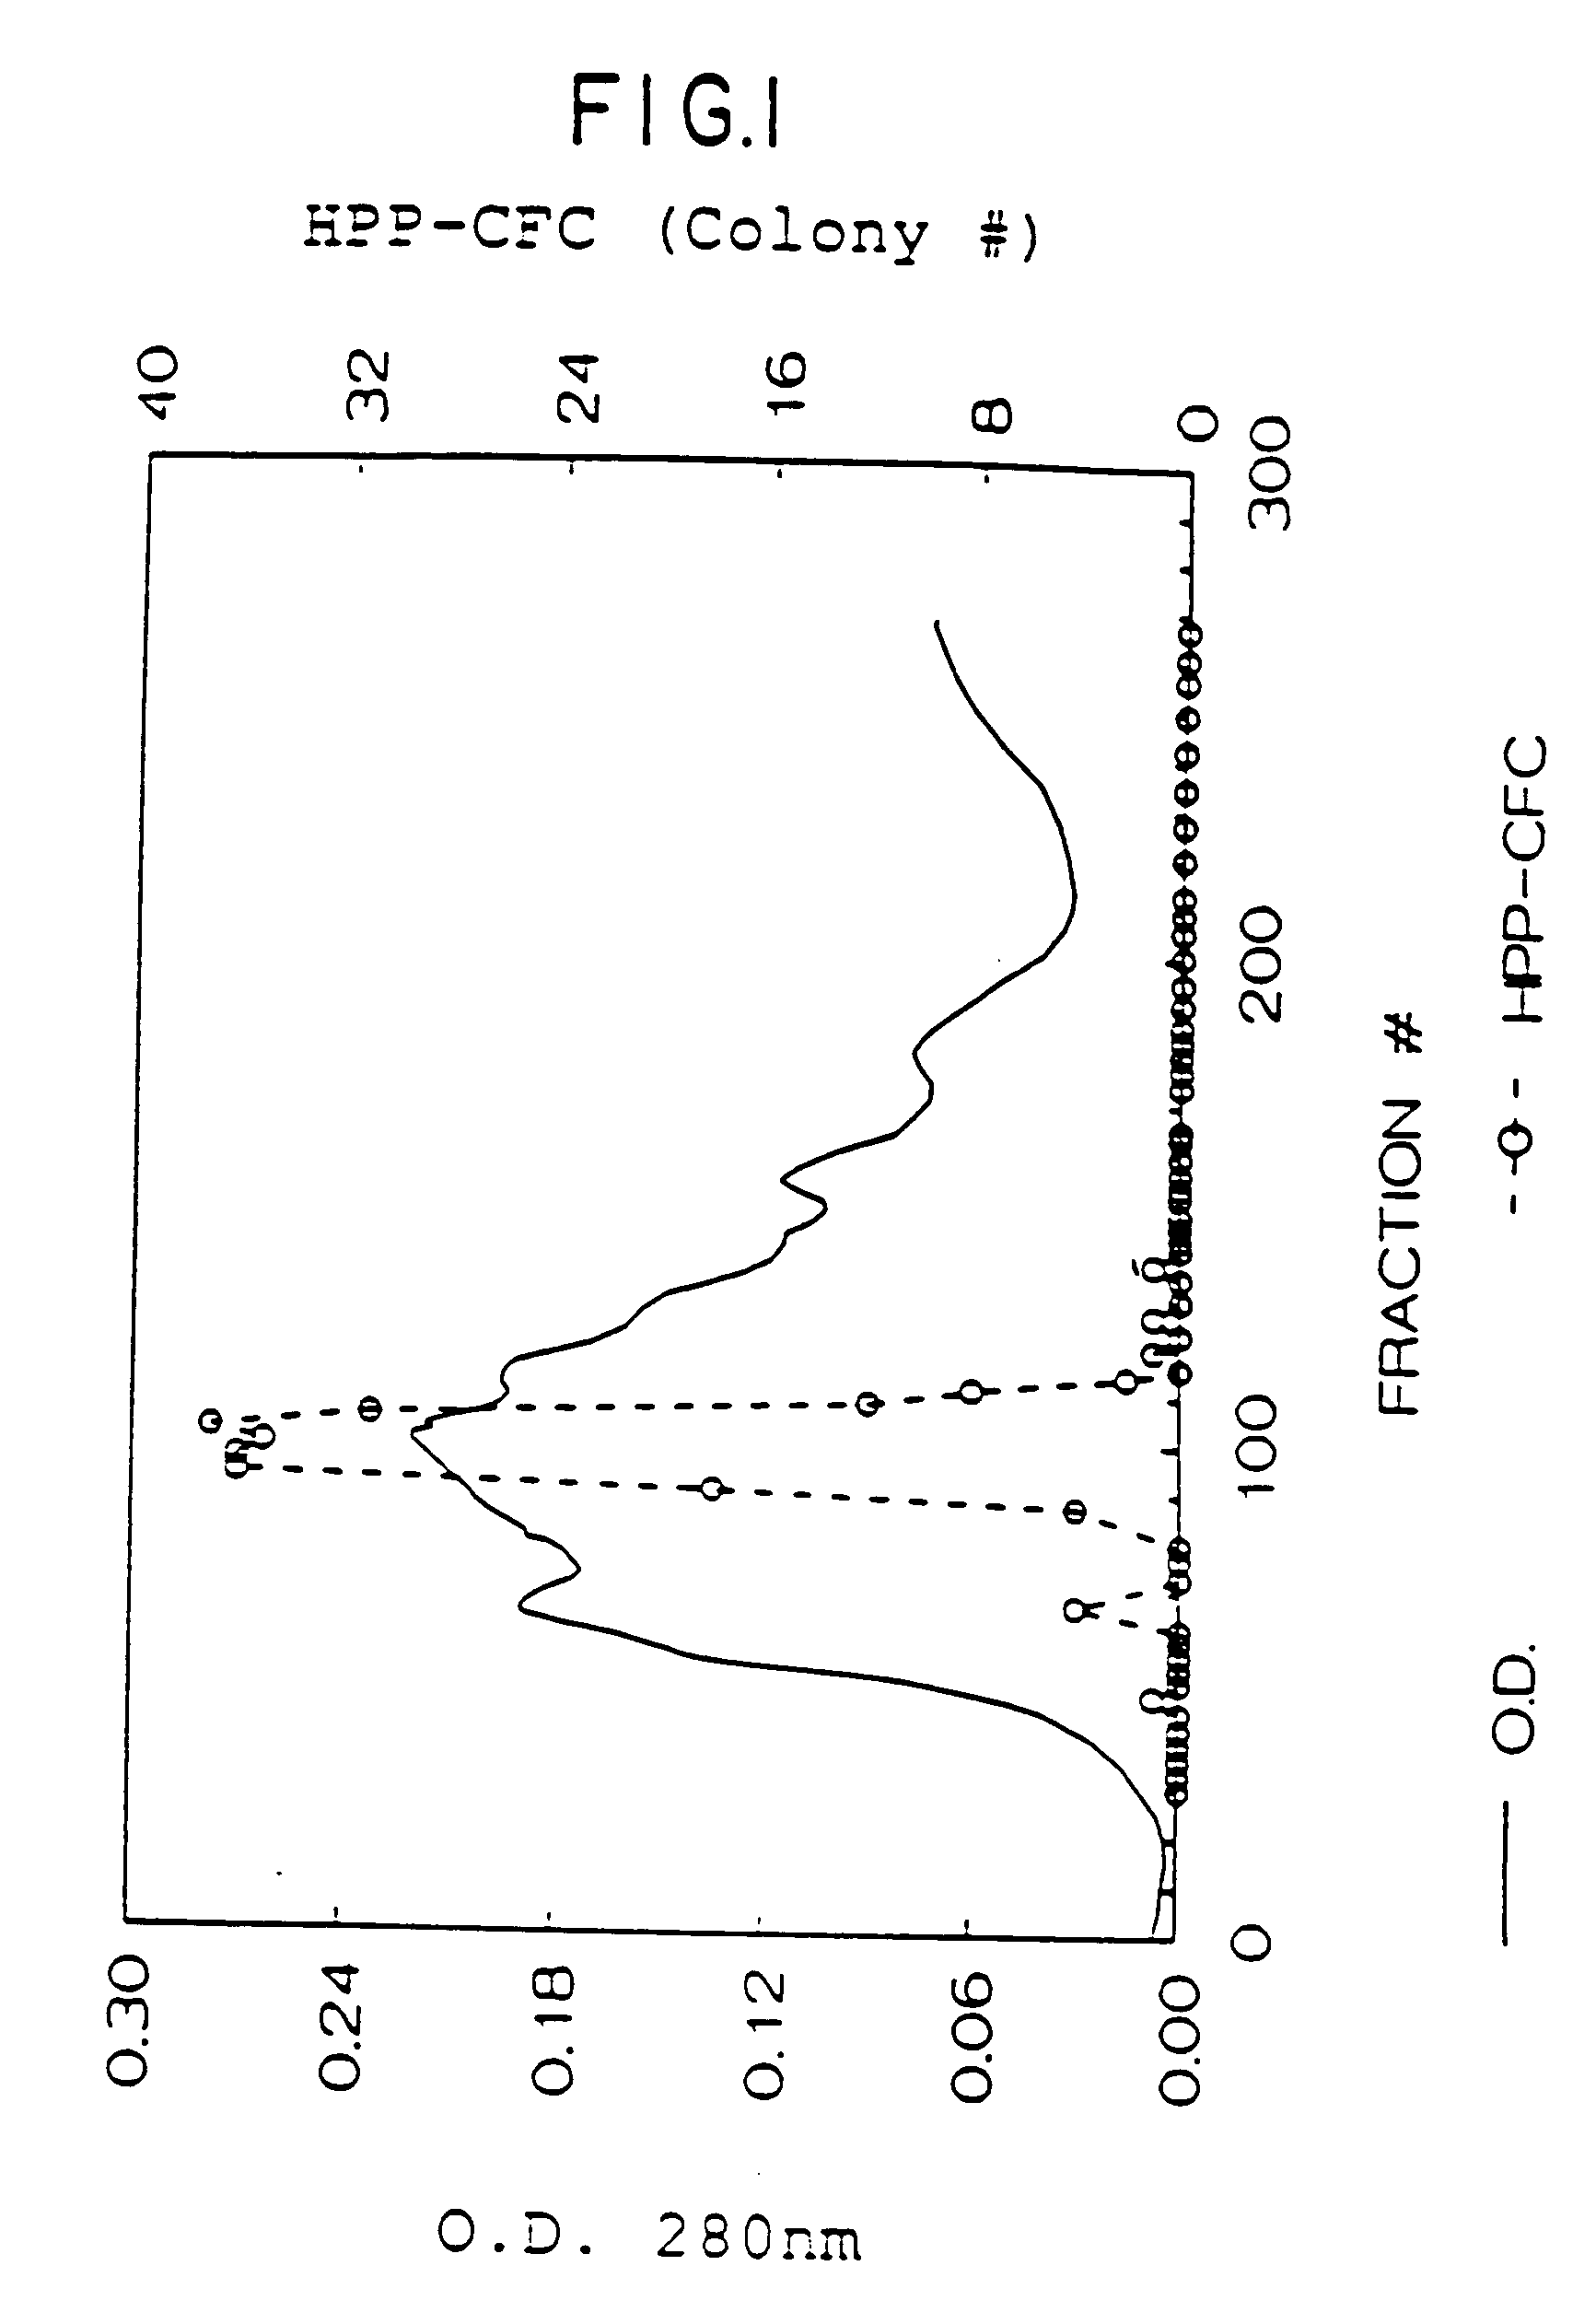 SCF antibody compositions and methods of using the same